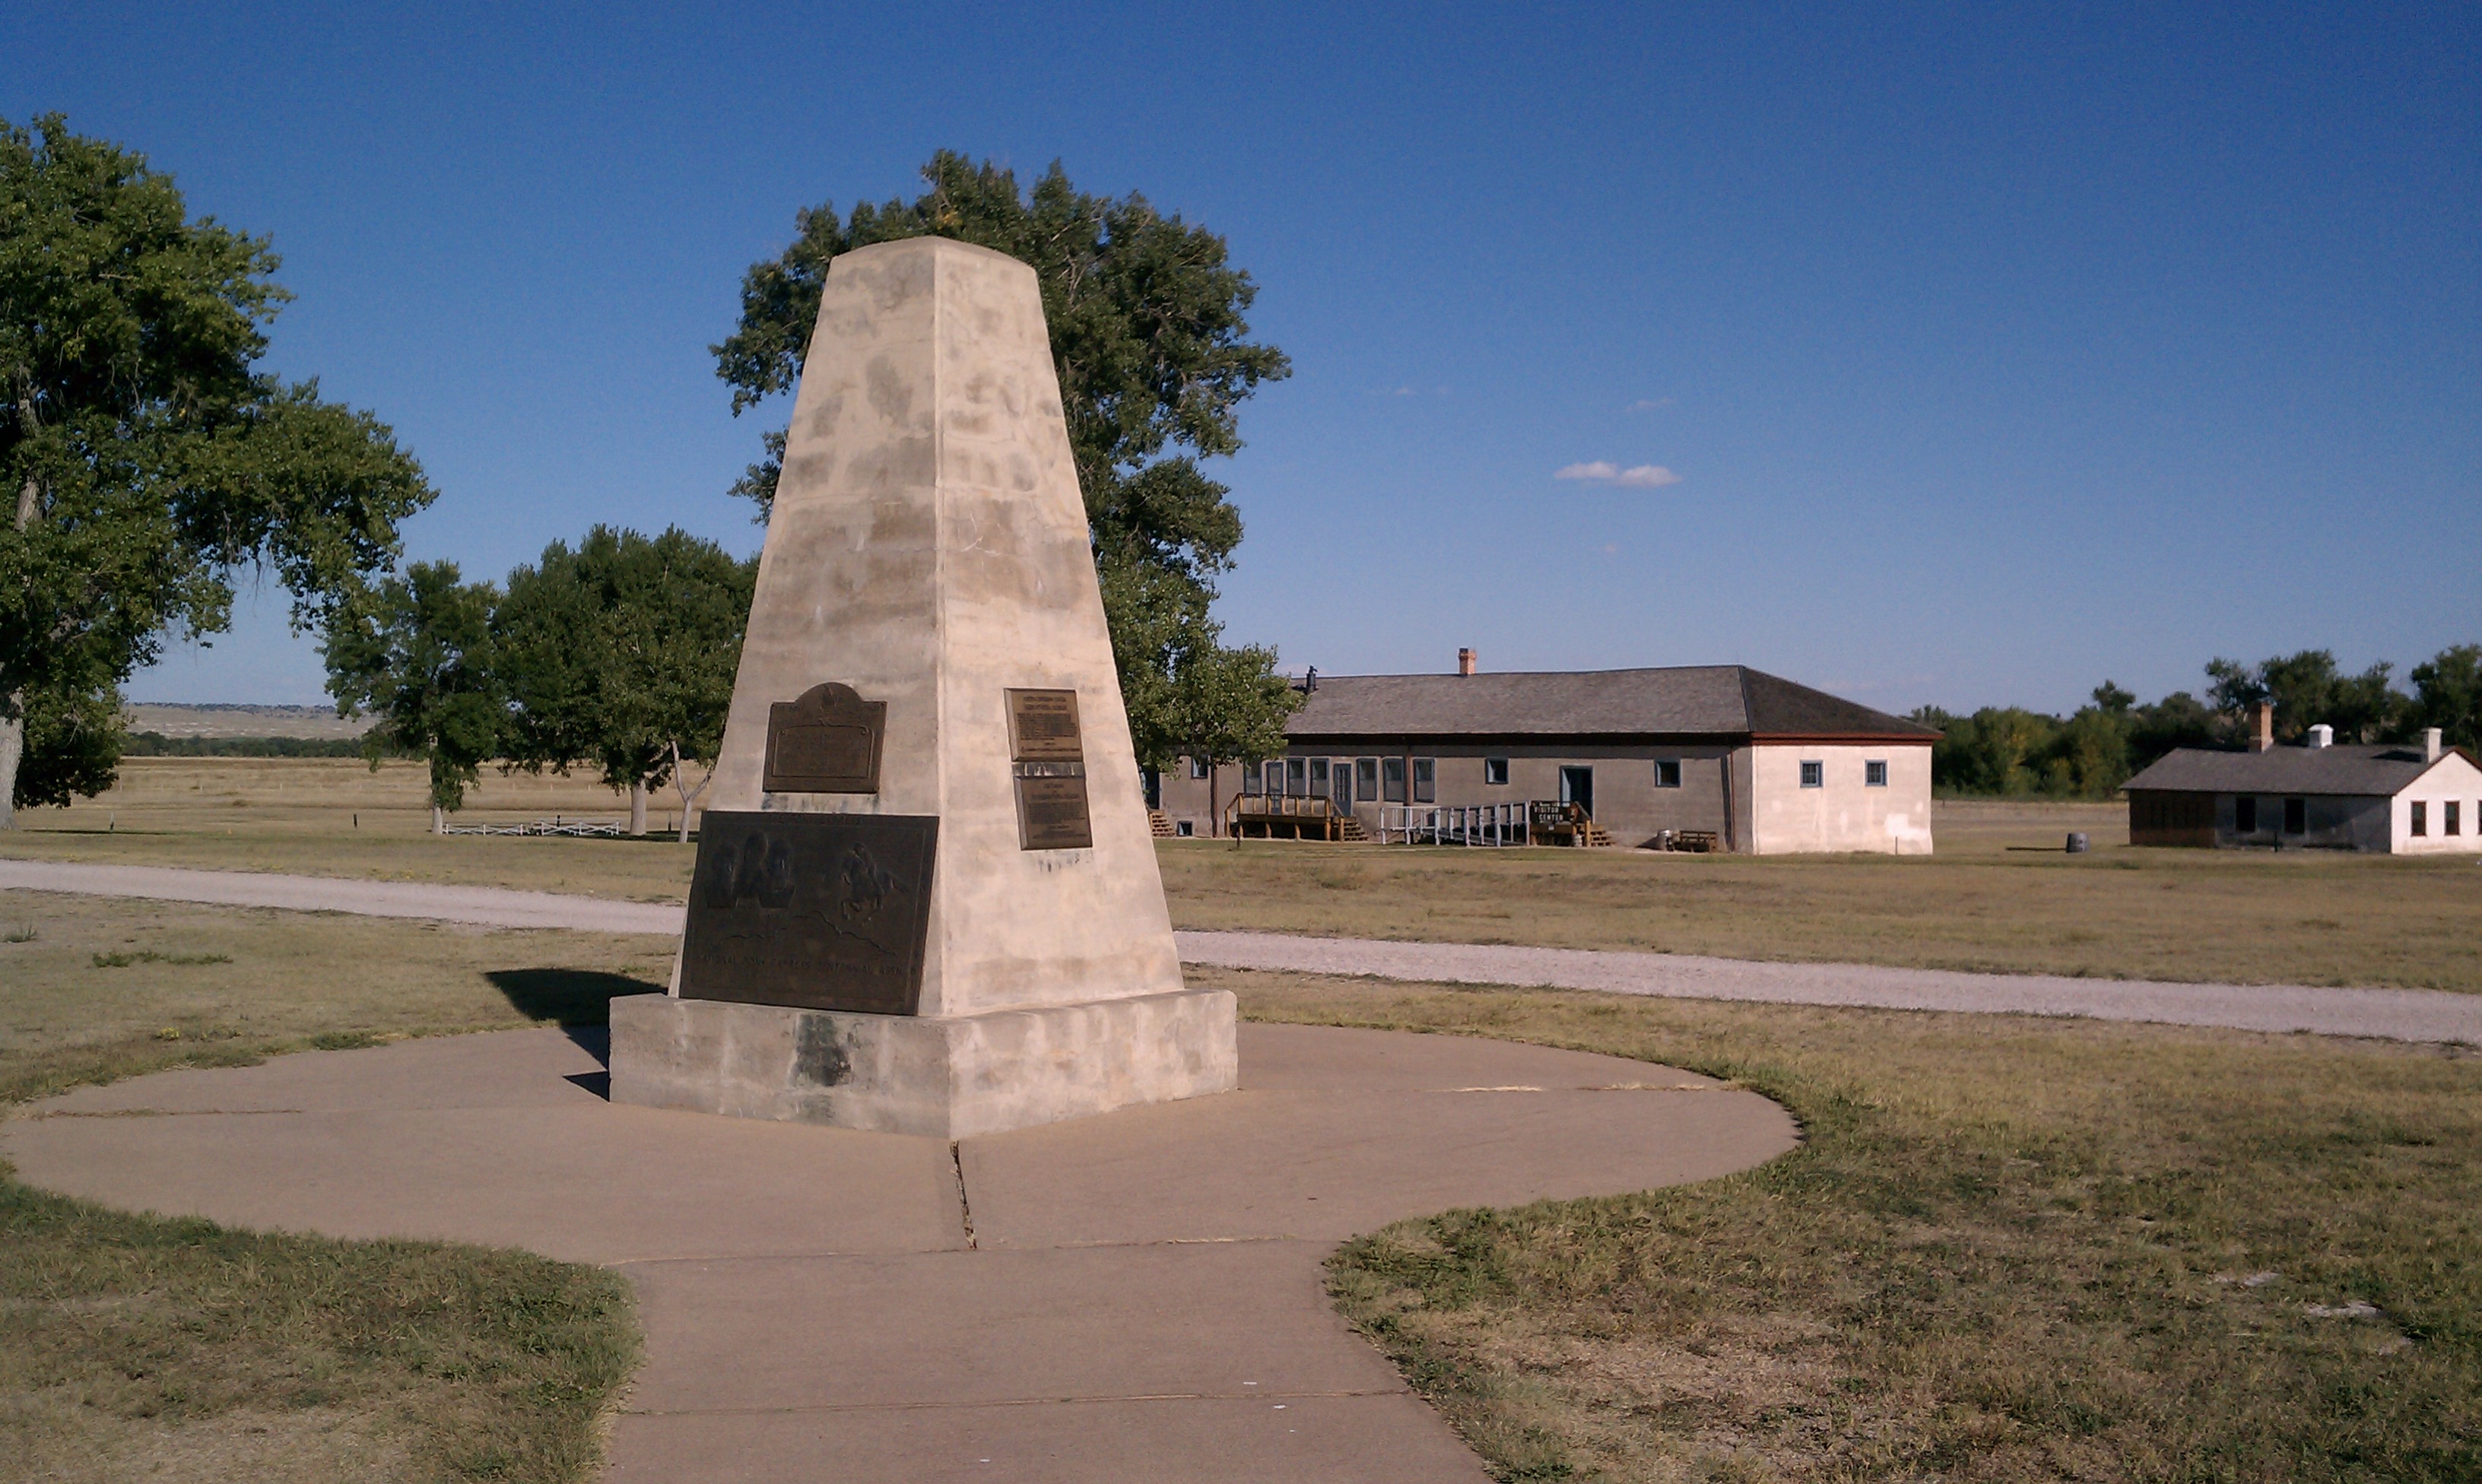 A tall obelisk monument with bronze plaques sits on a paved pathway in front of a building.